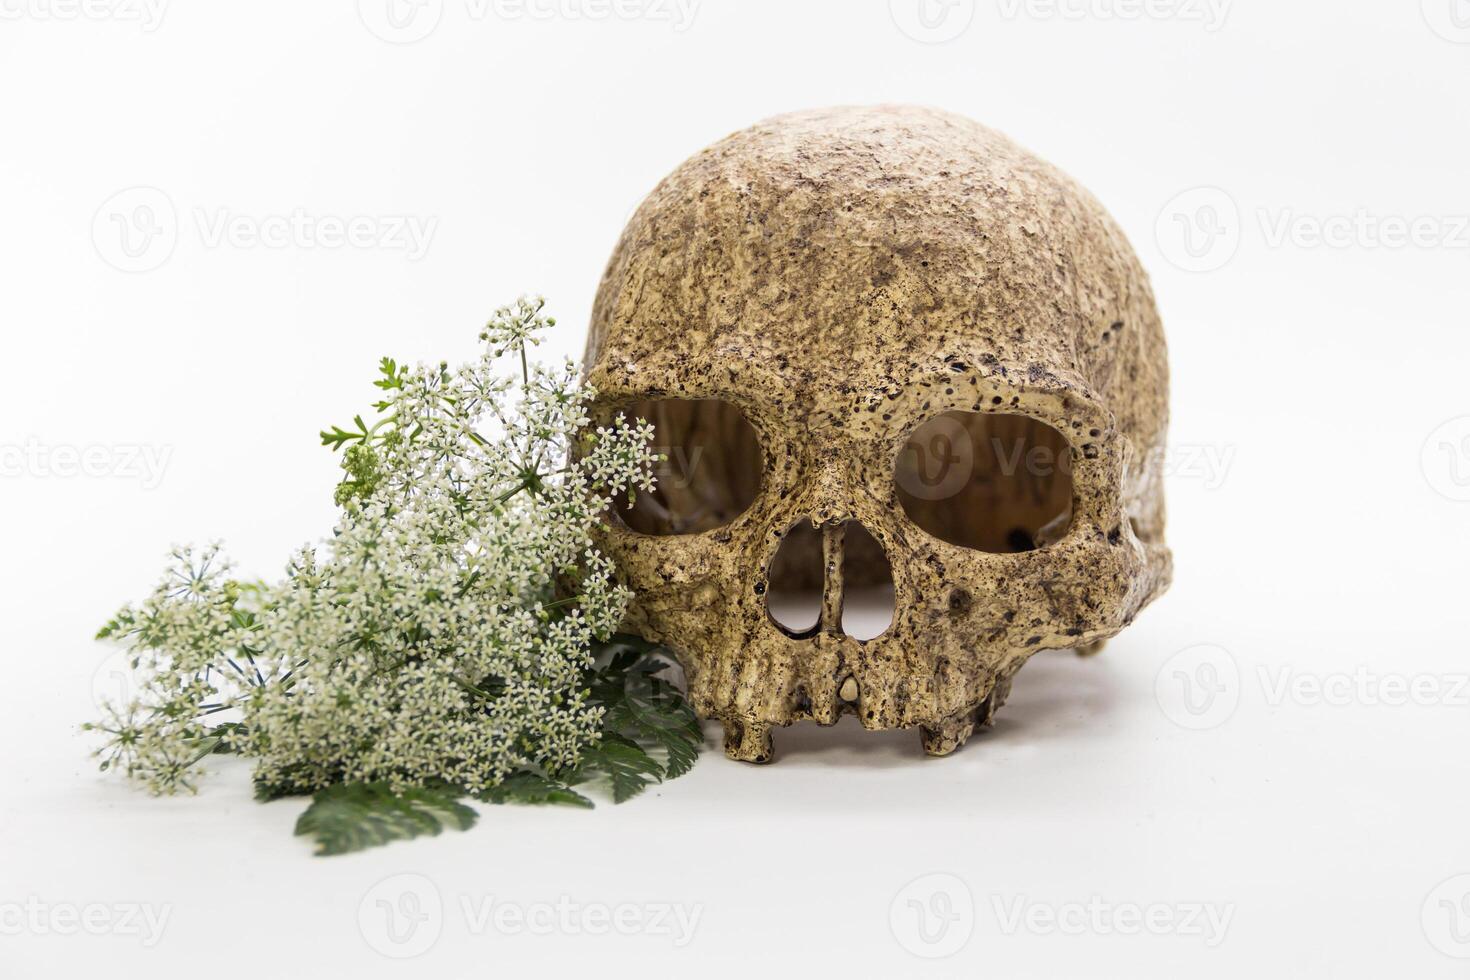 A bouquet of hemlock flowers with a skull photo